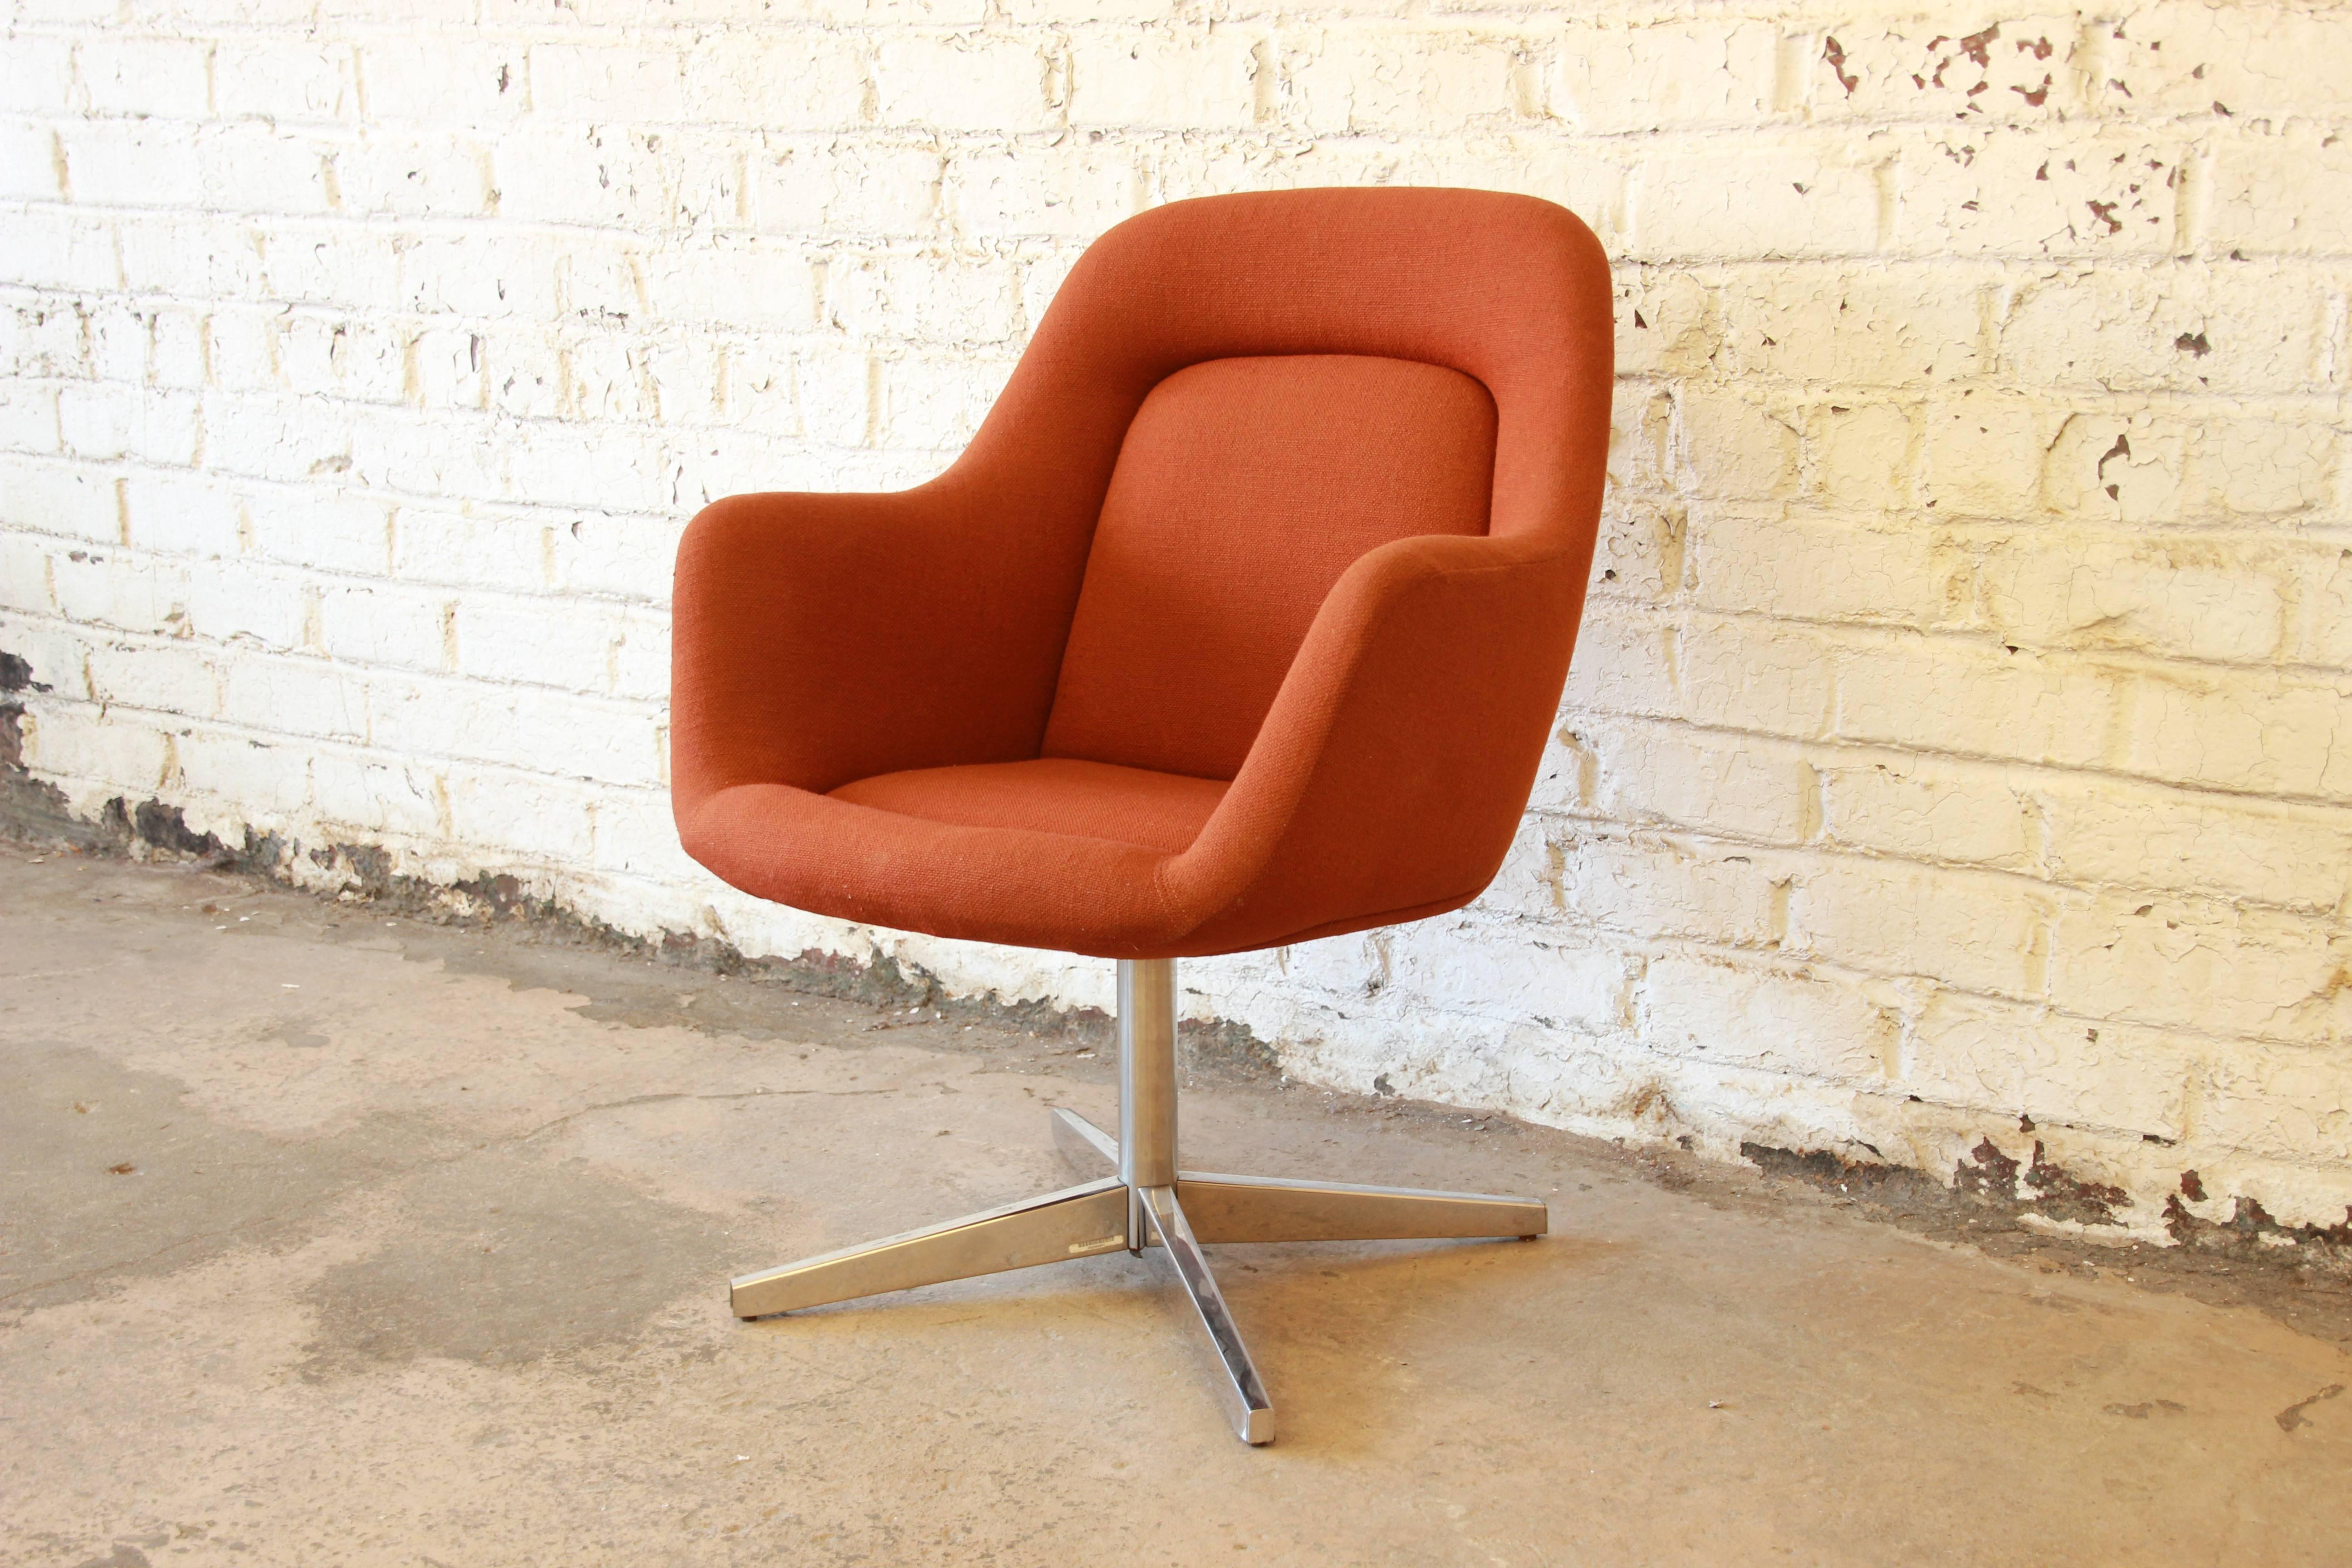 A very nice swiveling club or office chair designed by Max Pearson for Knoll International. The chair features a polished chrome base and original orange upholstery in very good condition. There is one very small spot of wear (see picture). Original